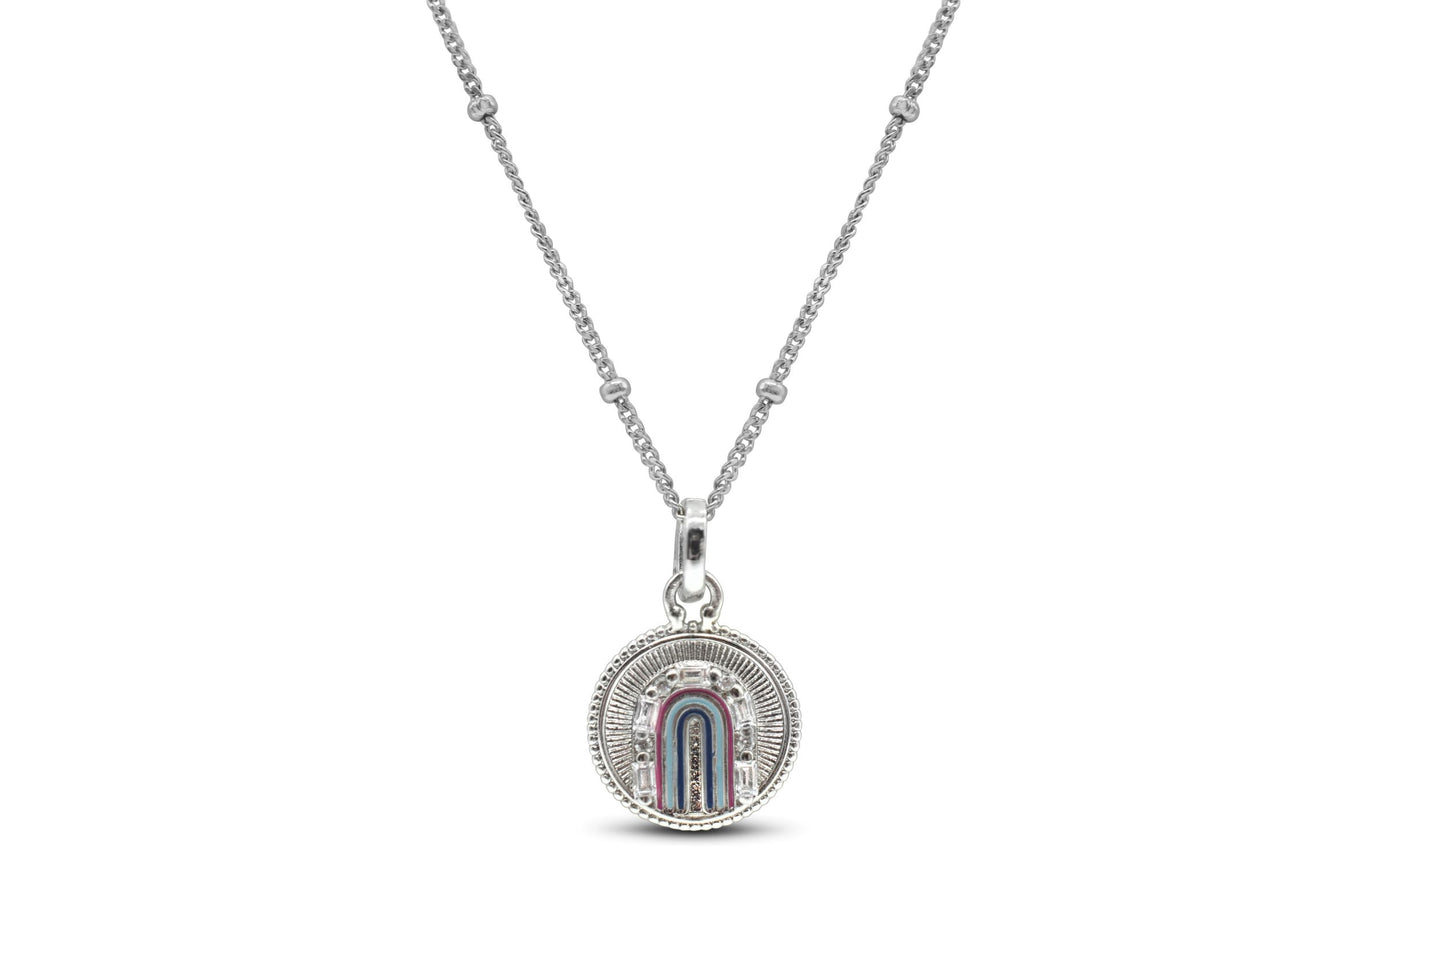 Lovable Lacquer Necklace - Arched Rainbow